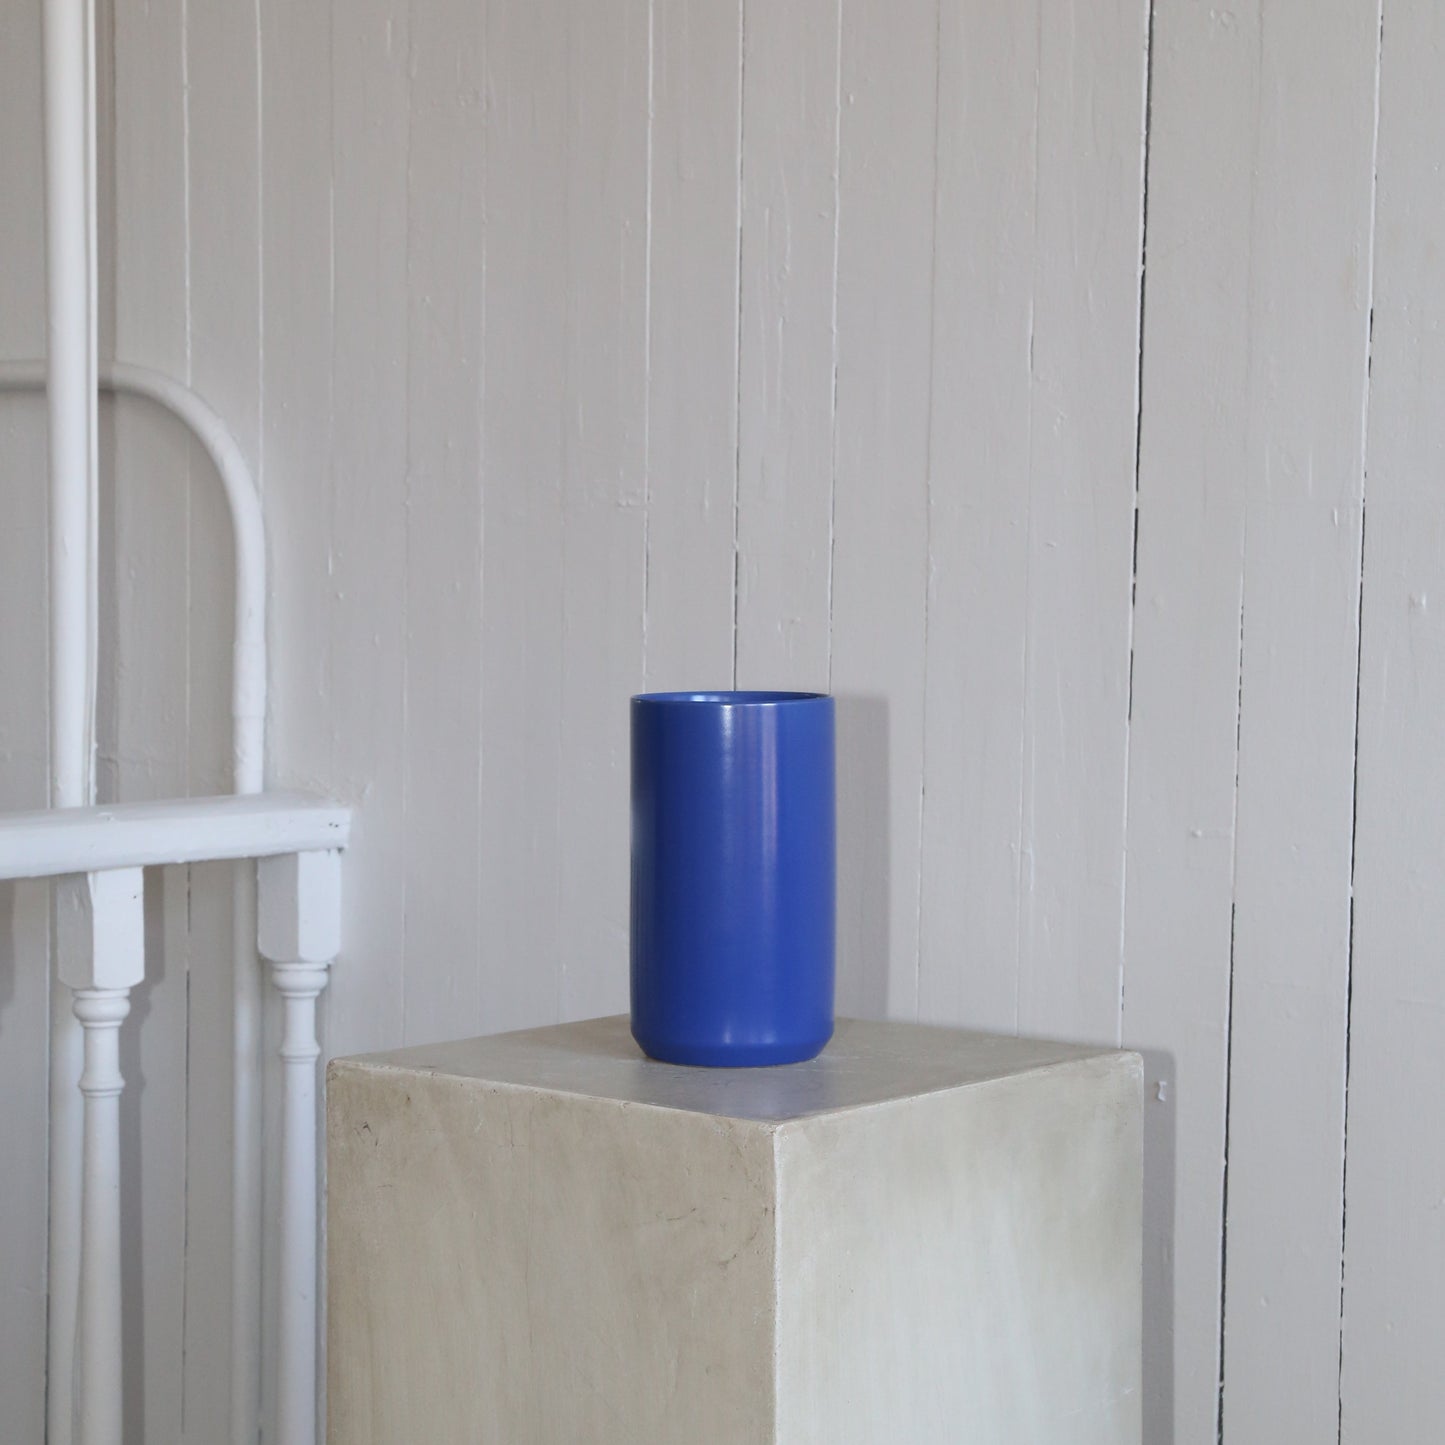 Blue Kendall Vase available at Rook & Rose.